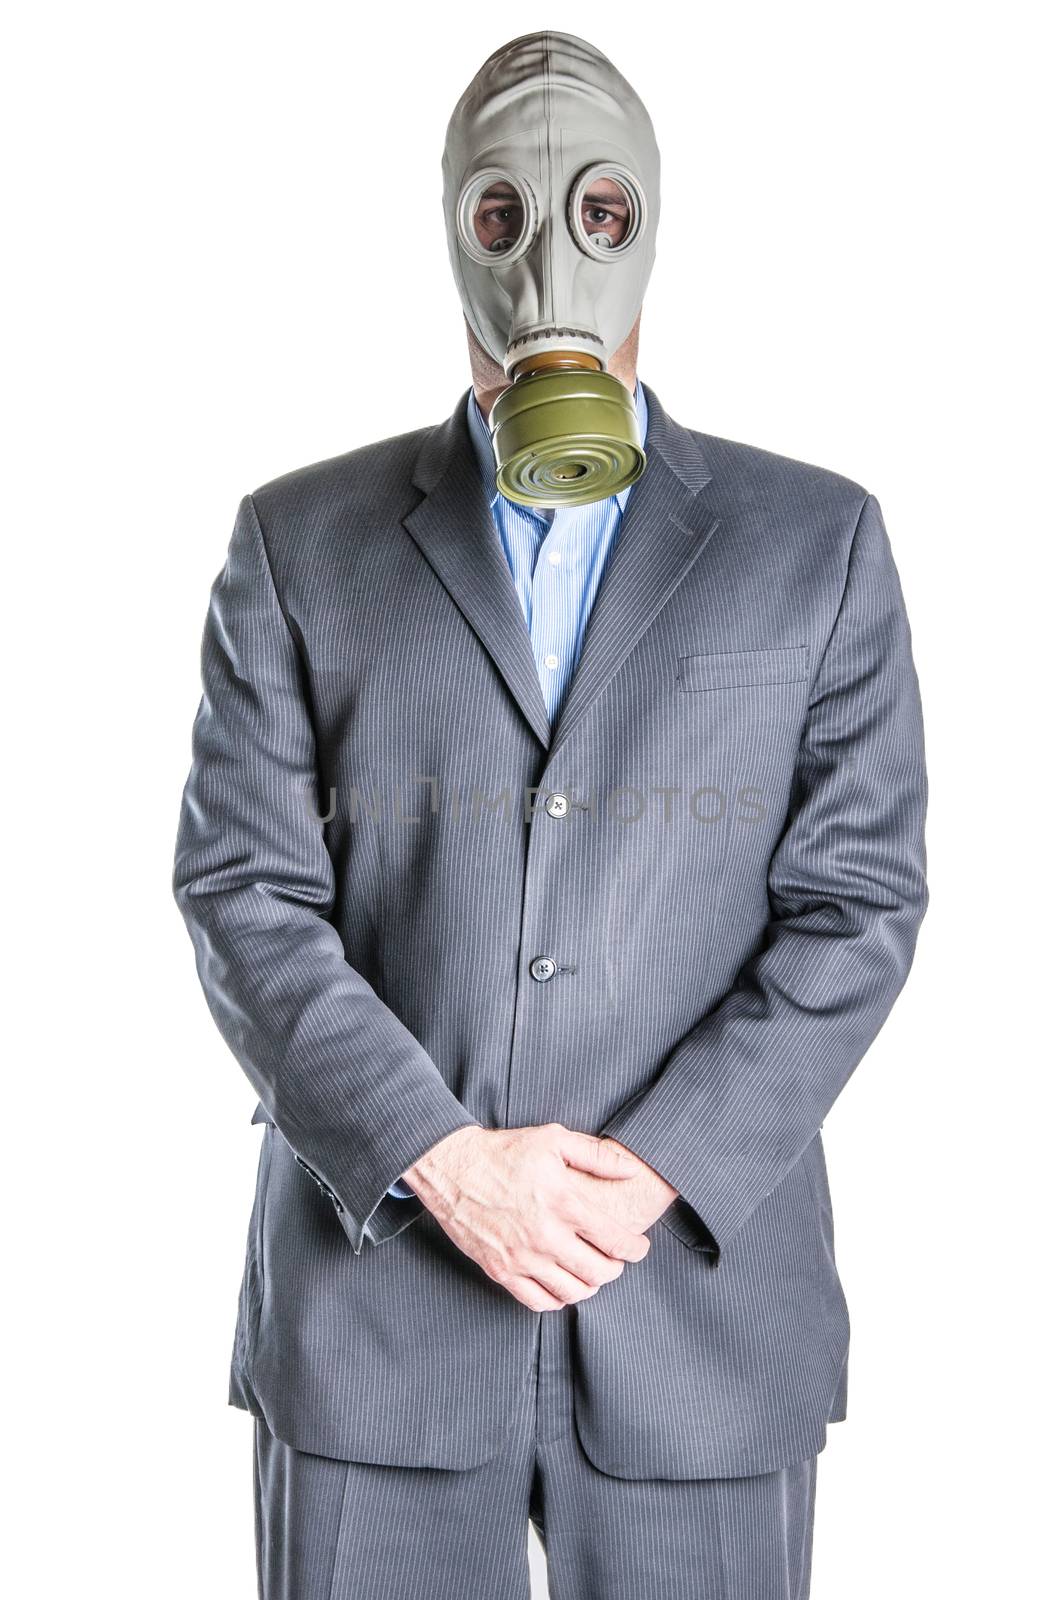  Man in Gas Mask by CHR1